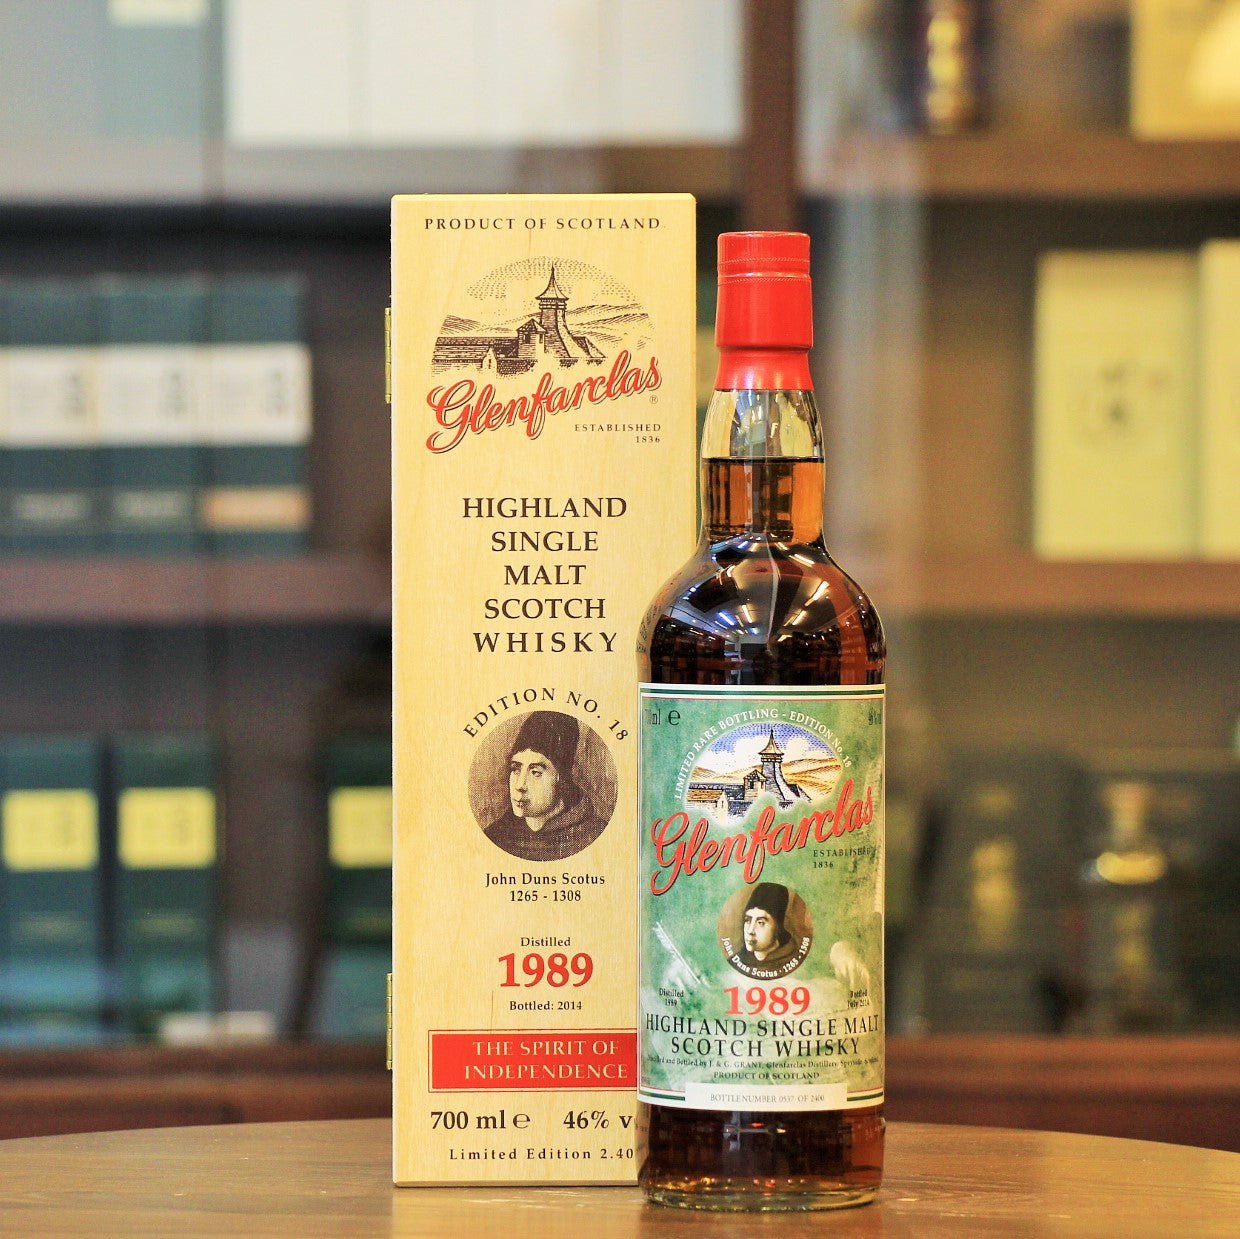 This speyside single malt from Glenfarclas is the edition No.18 of the "Spirit of Independence Series" range form Glenfarclas, celebrating independent, philanthropic individuals, in this case John Duns Scotus (1265-1308). Distilled in 1989, matured for over 24 years in six different Oloroso Sherry Casks and bottled in 2014. Only 2400 bottles released. 